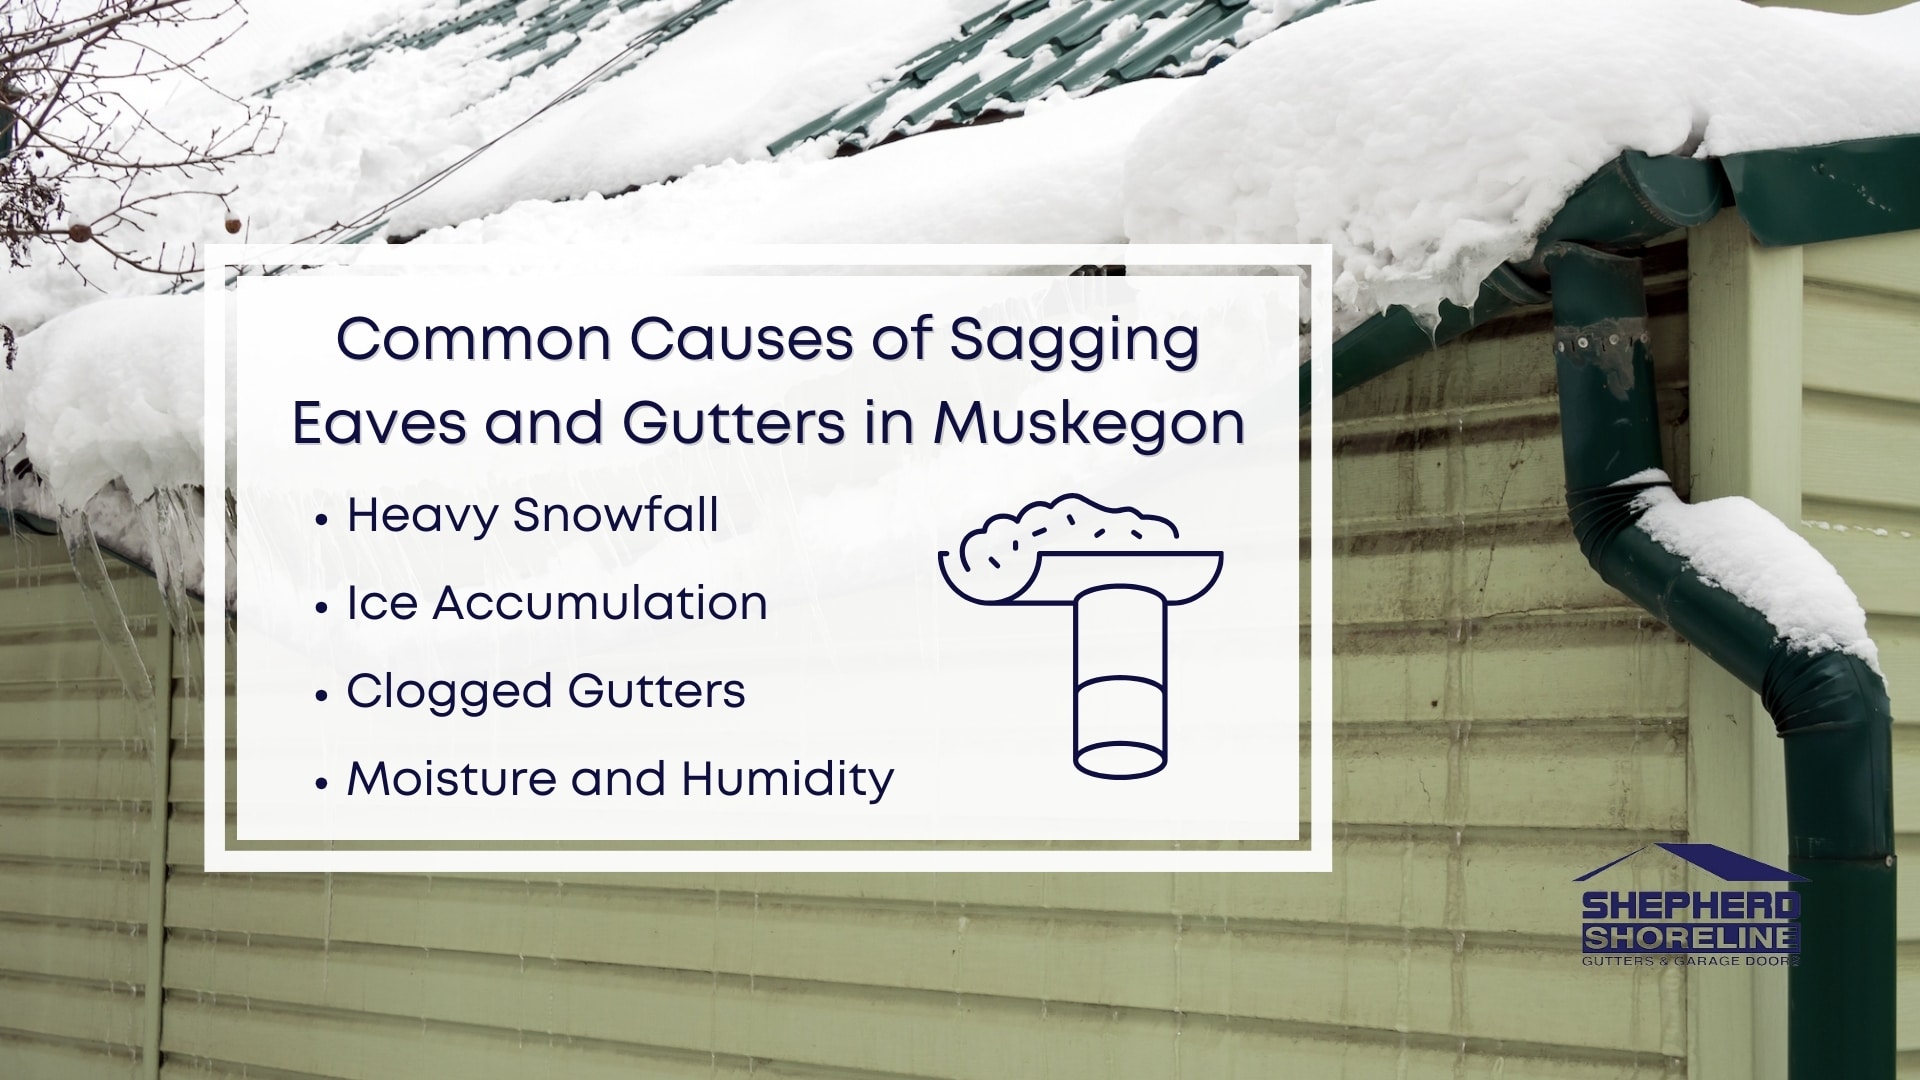 Infographic image of common causes of sagging eaves and gutters in Muskegon